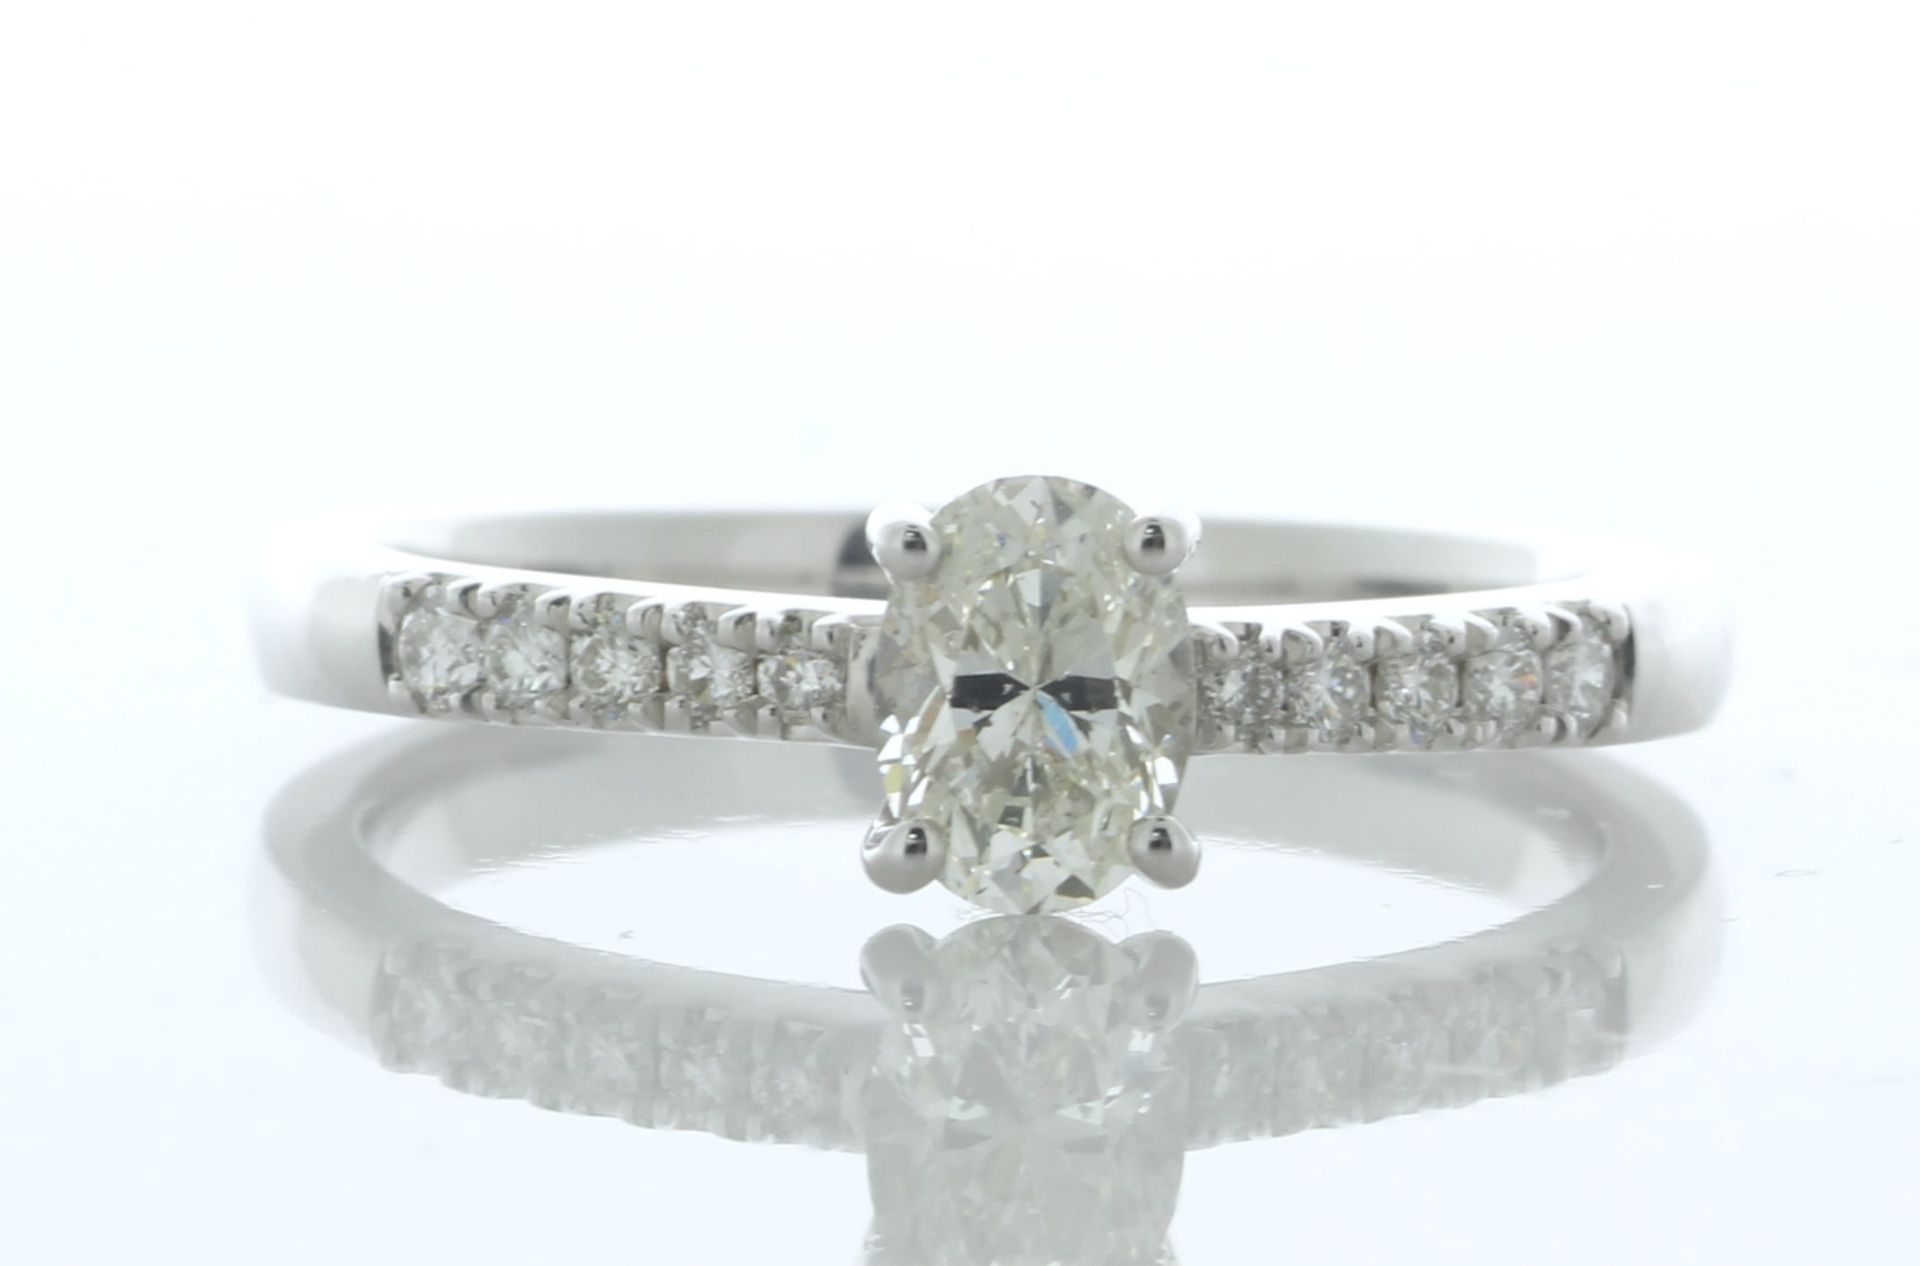 18ct White Gold Oval Cut Diamond Ring (0.37) 0.65 Carats - Valued By IDI £7,180.00 - A stunning oval